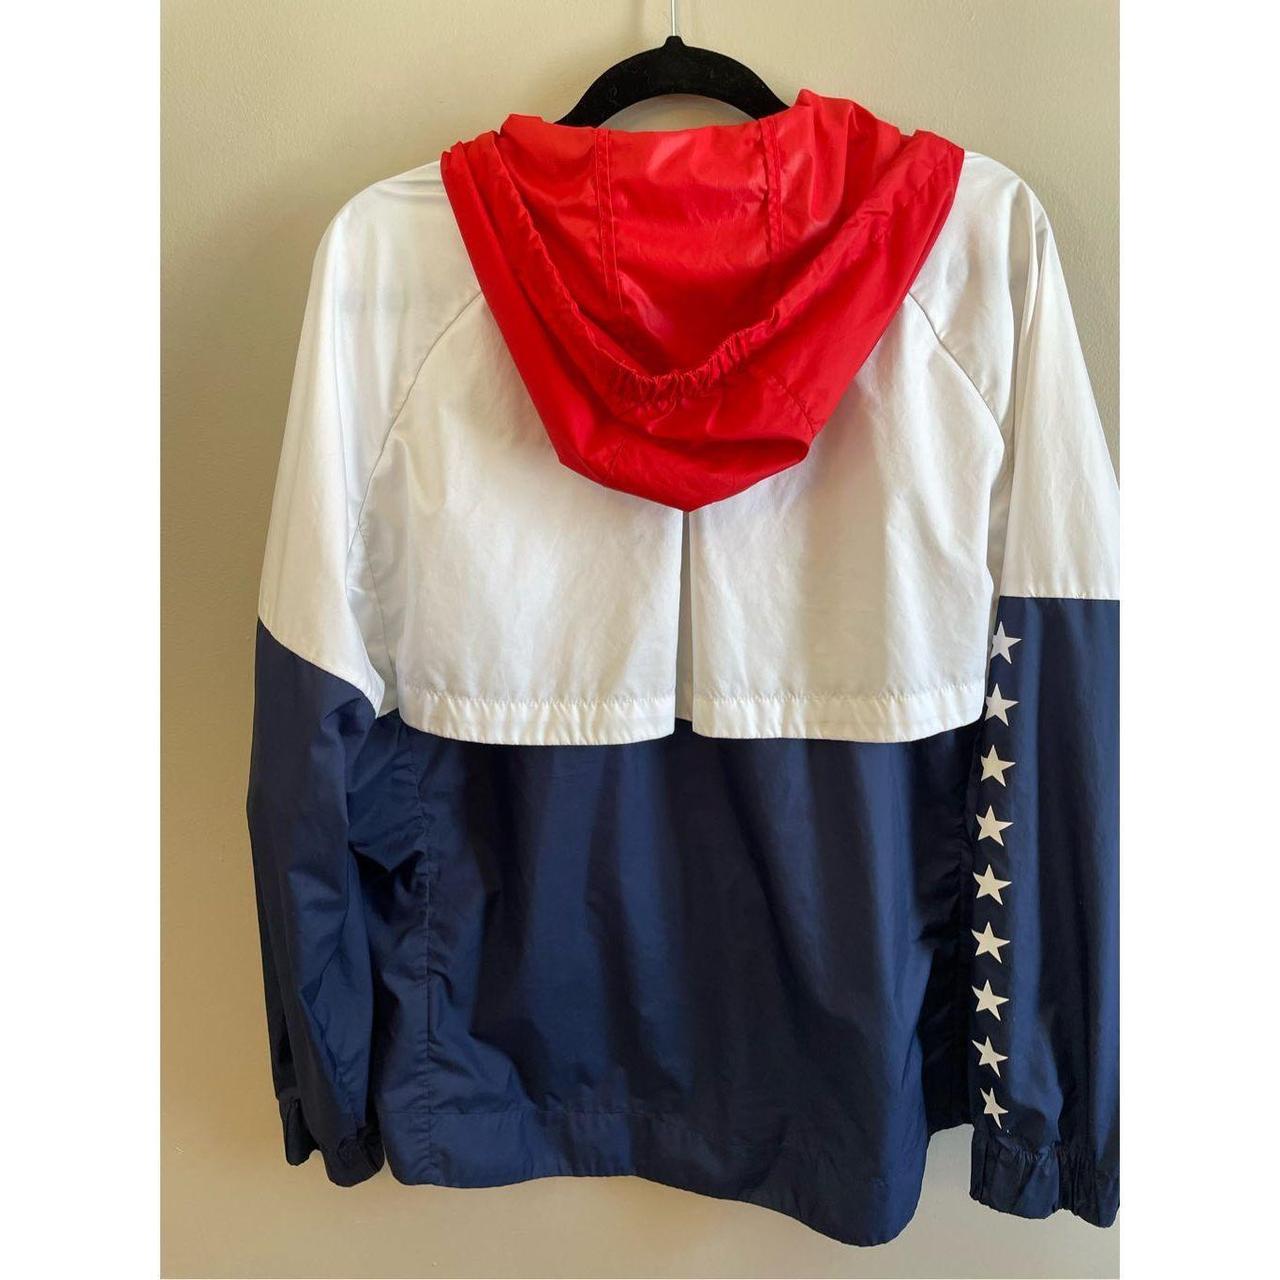 Nike Women's White and Red Jacket